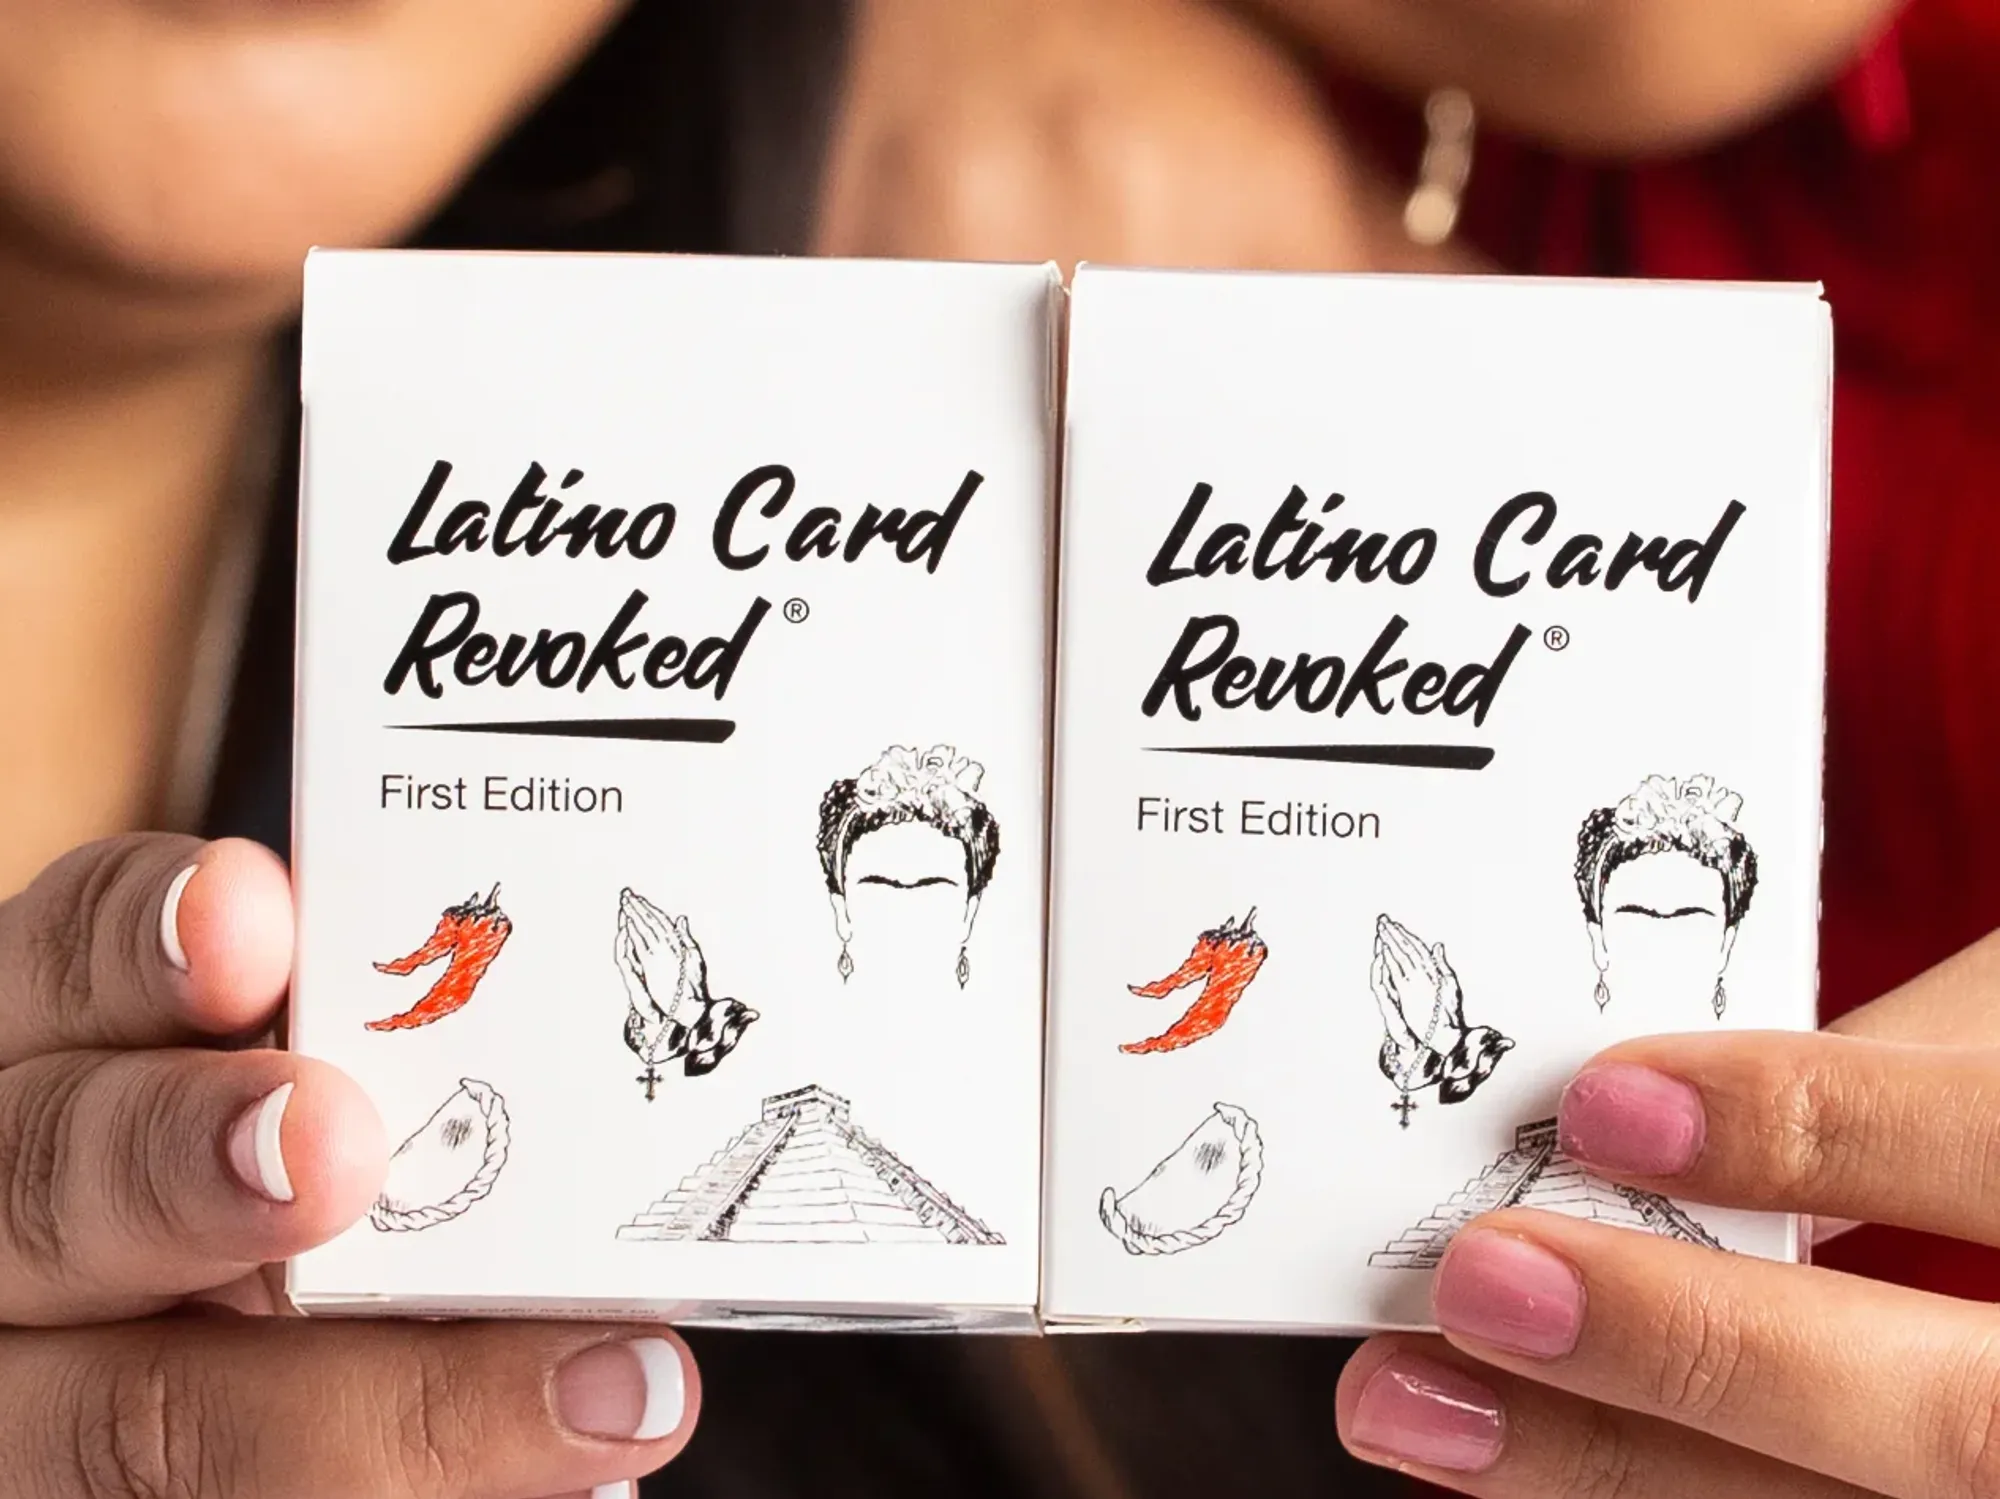 a promotional image for latino card revoked, a latino party game